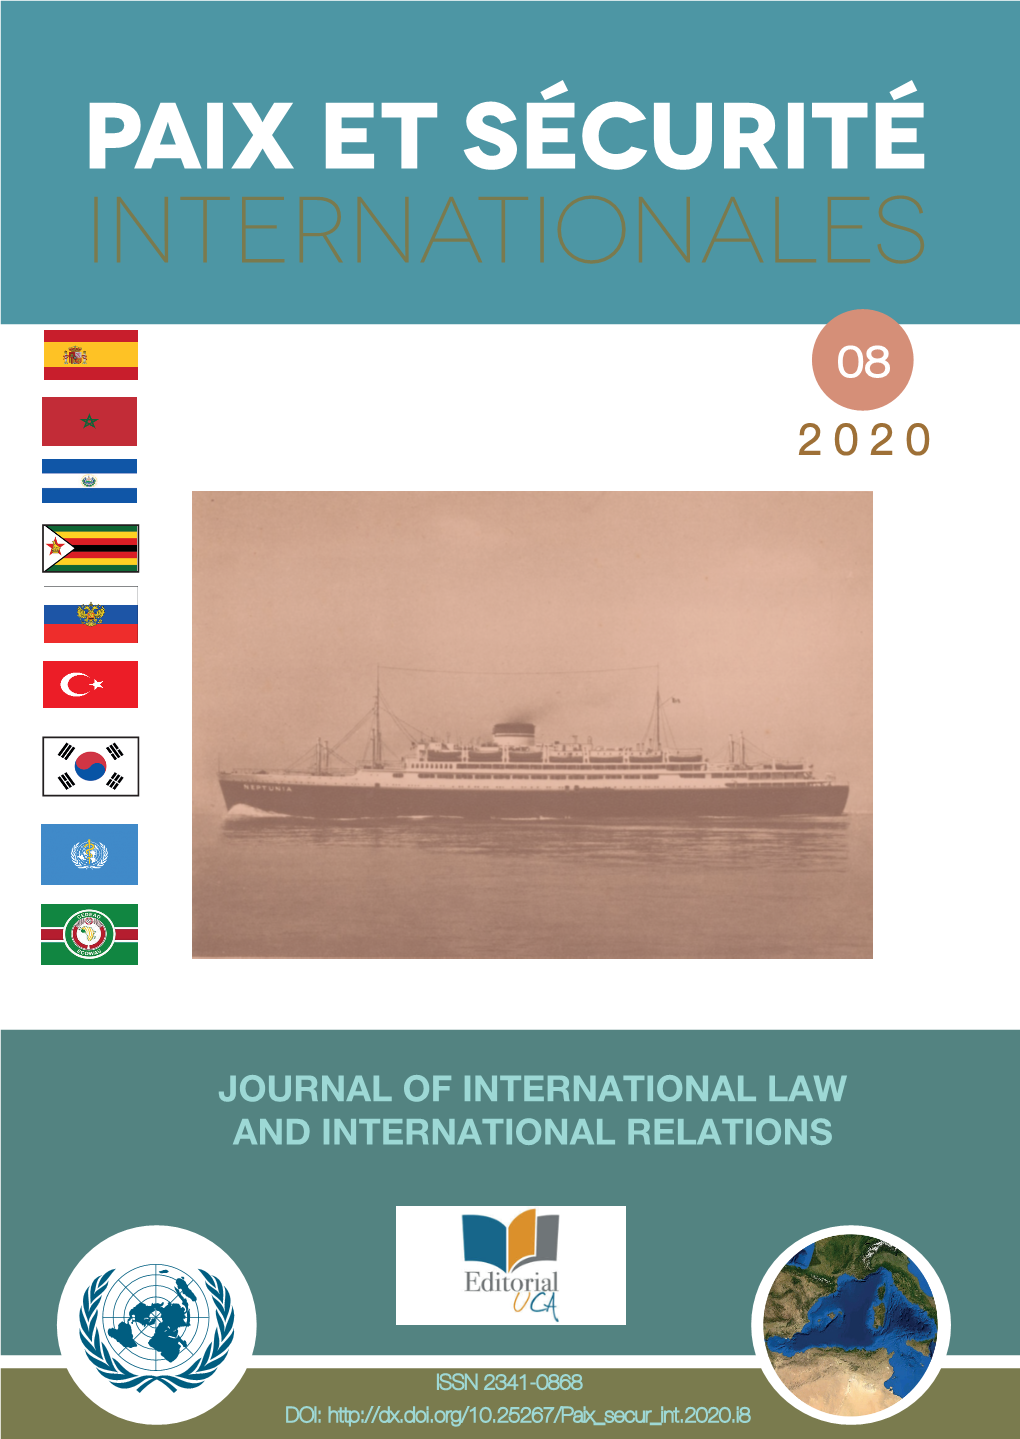 Journal of International Law and International Relations